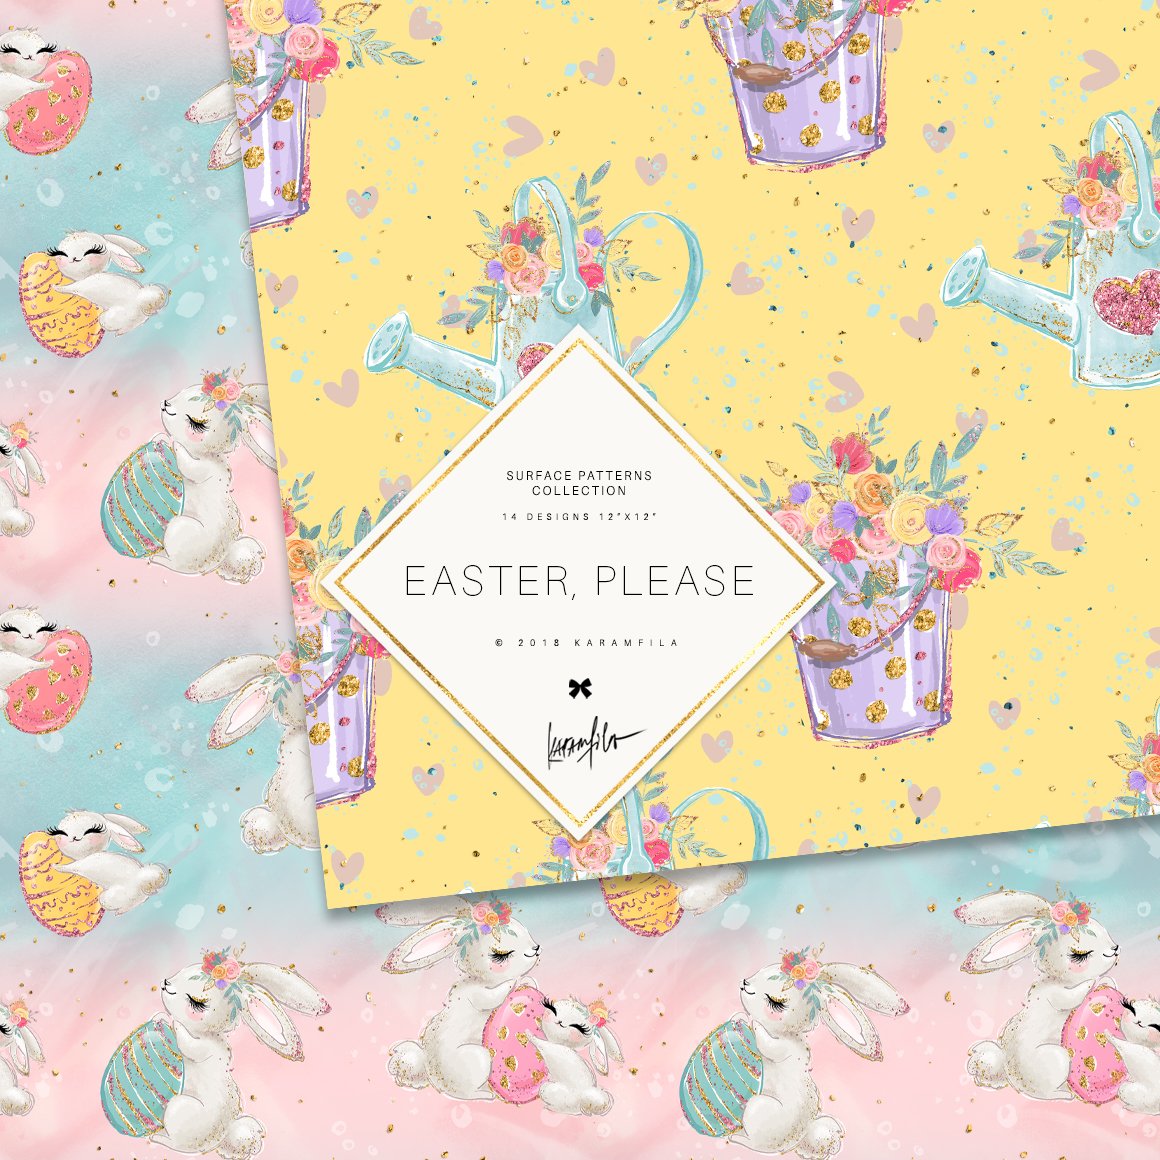 12 Easter Seamless Patterns.